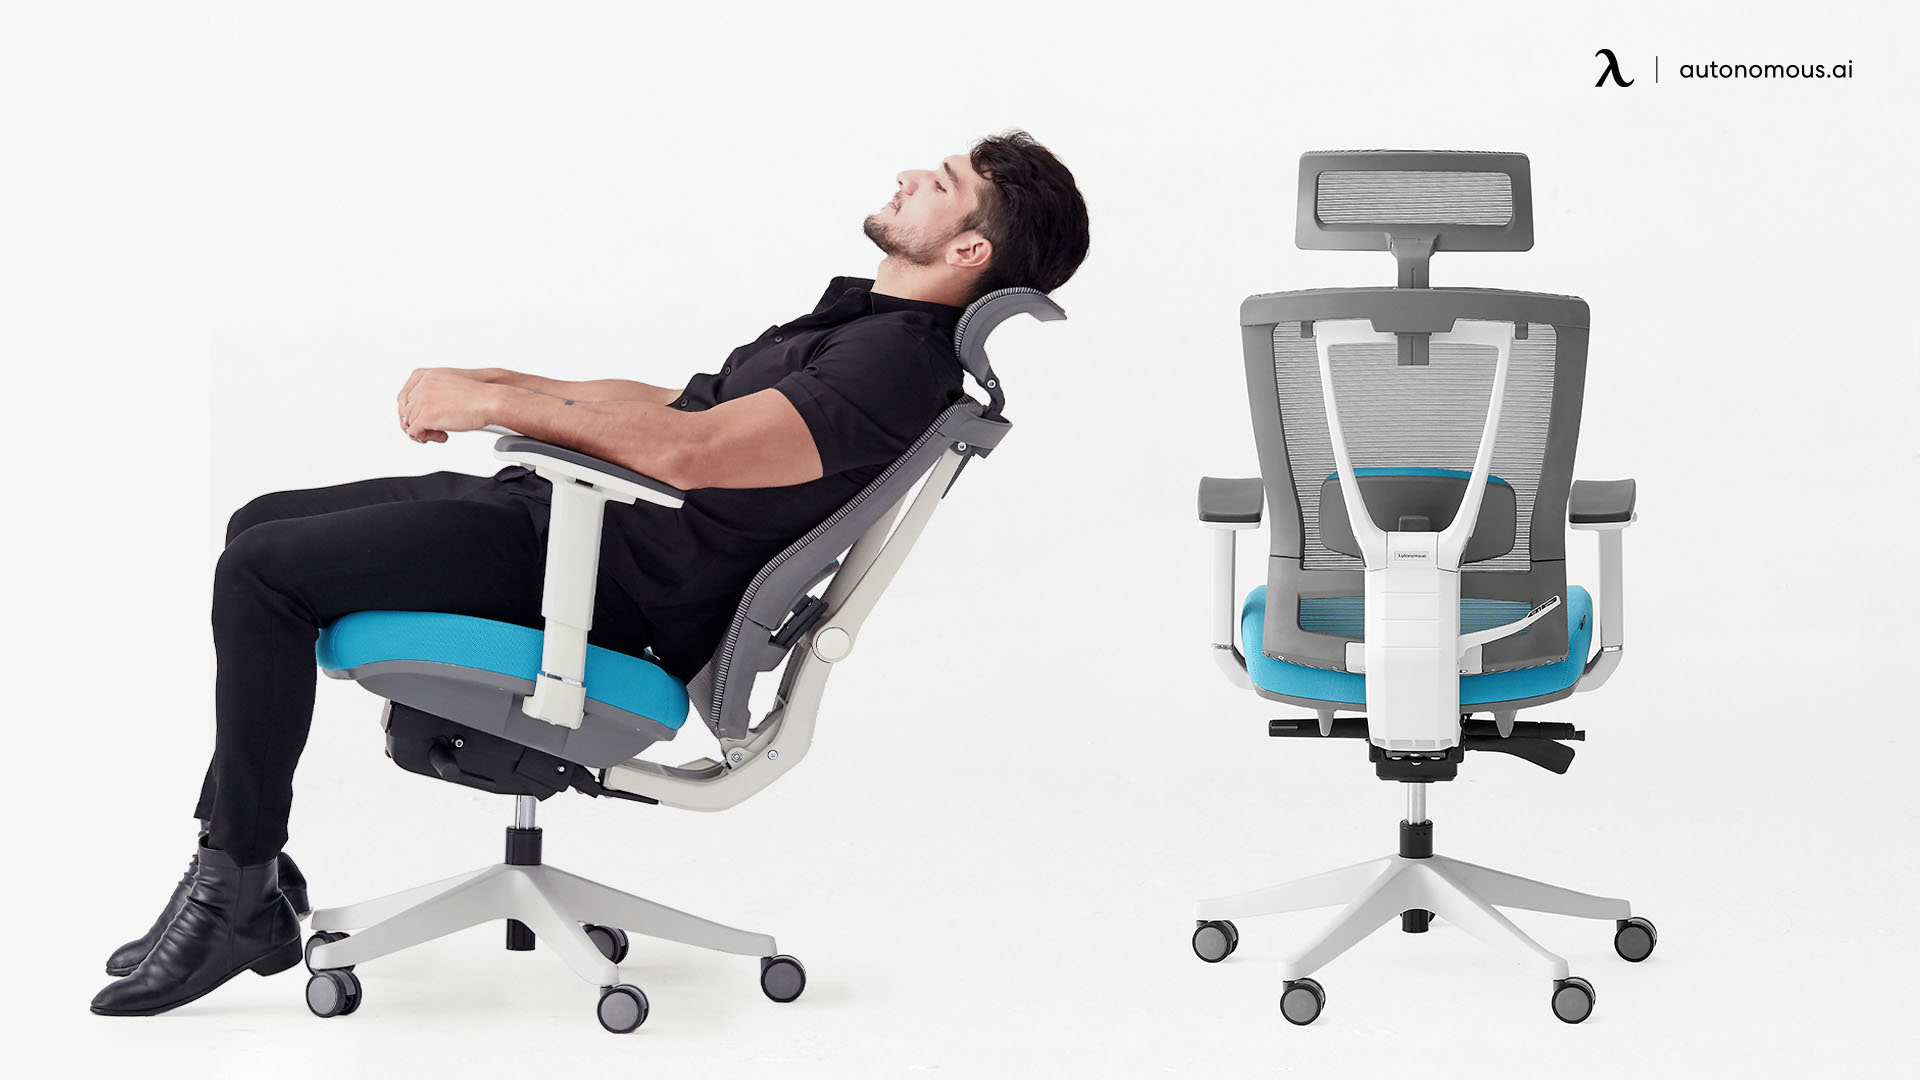 The ErgoChair 2 promoted in black friday from Autonomous